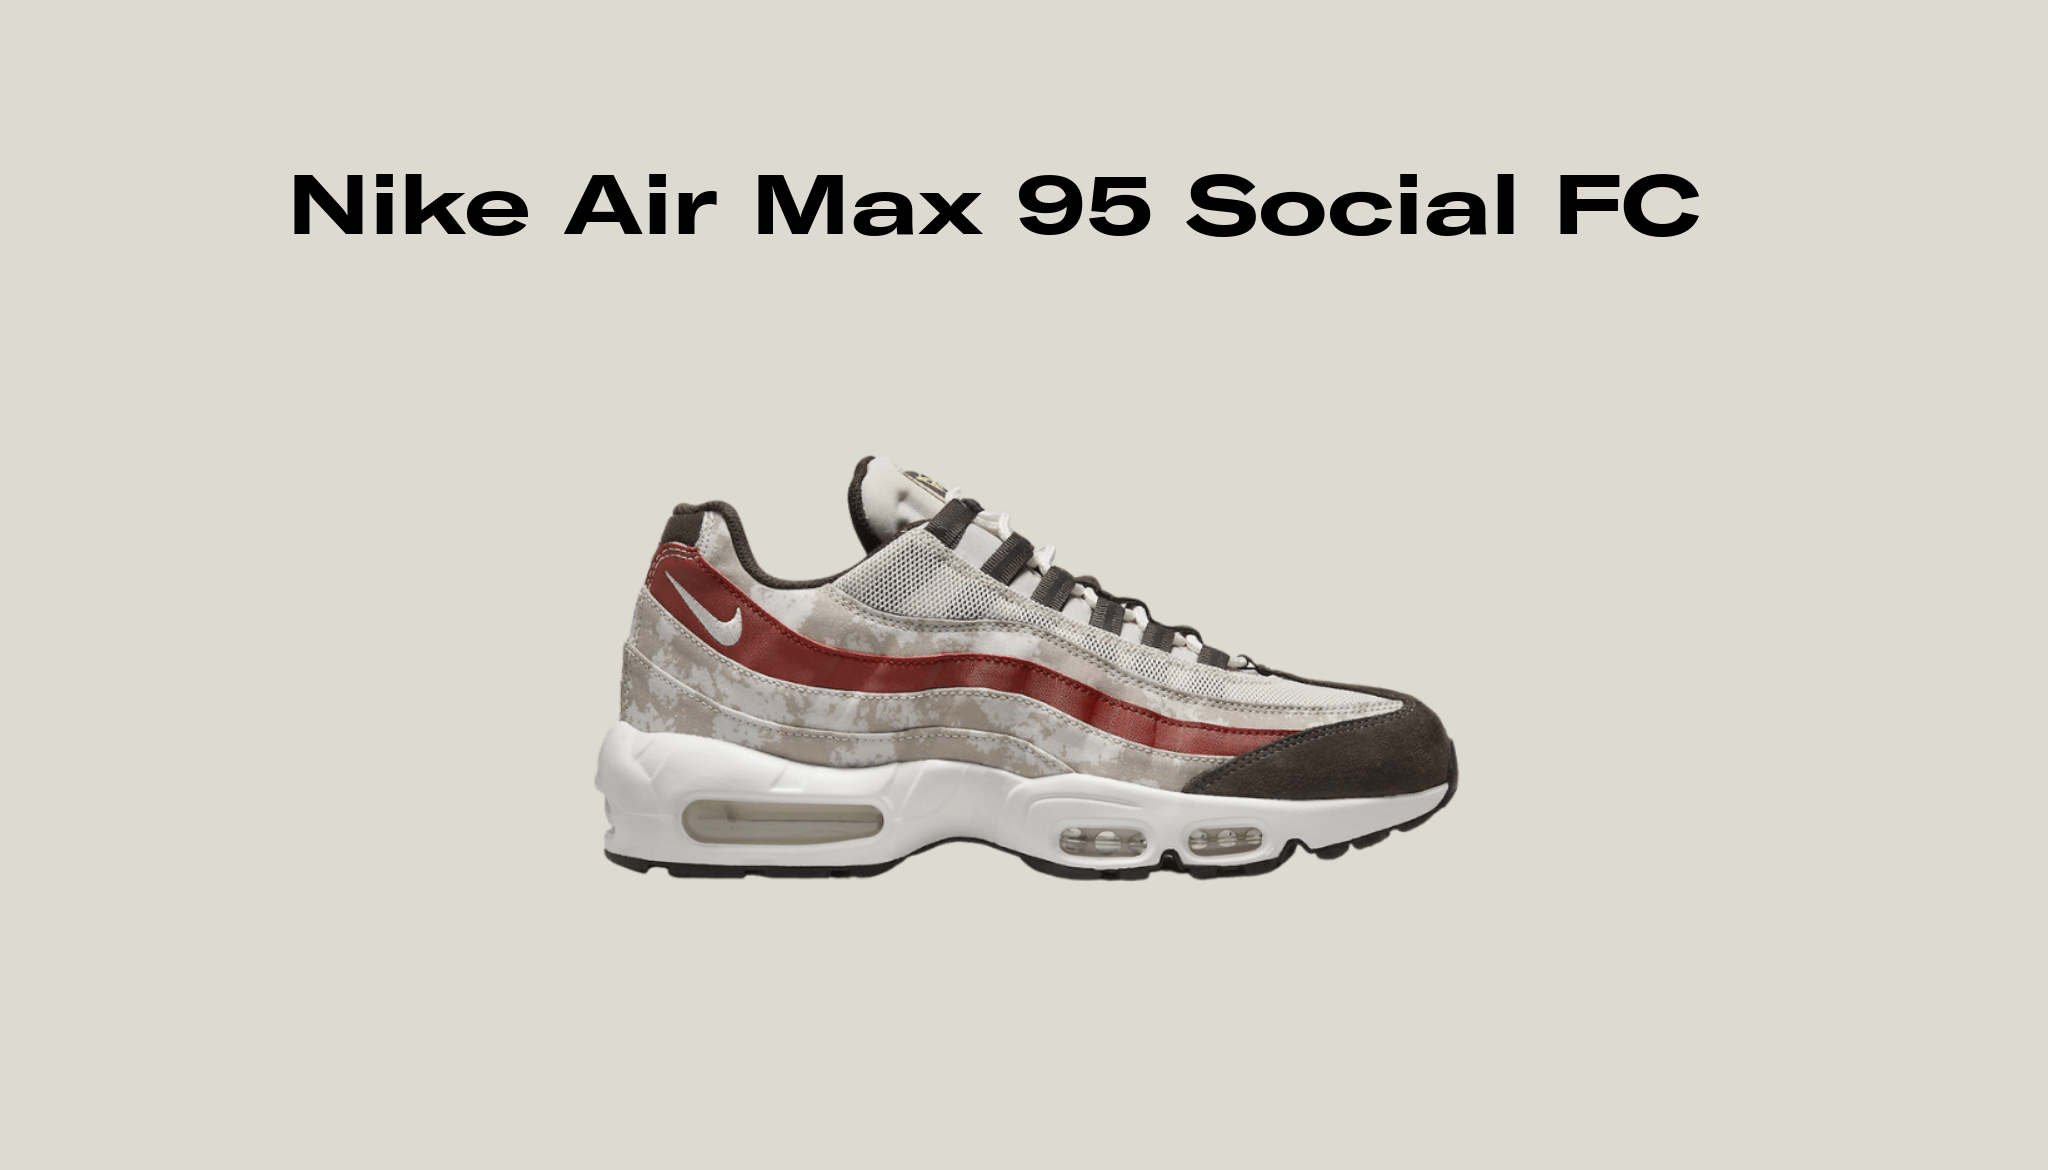 Moans The room peanuts Nike Air Max 95 Social FC, Raffles and Release Date | Sole Retriever